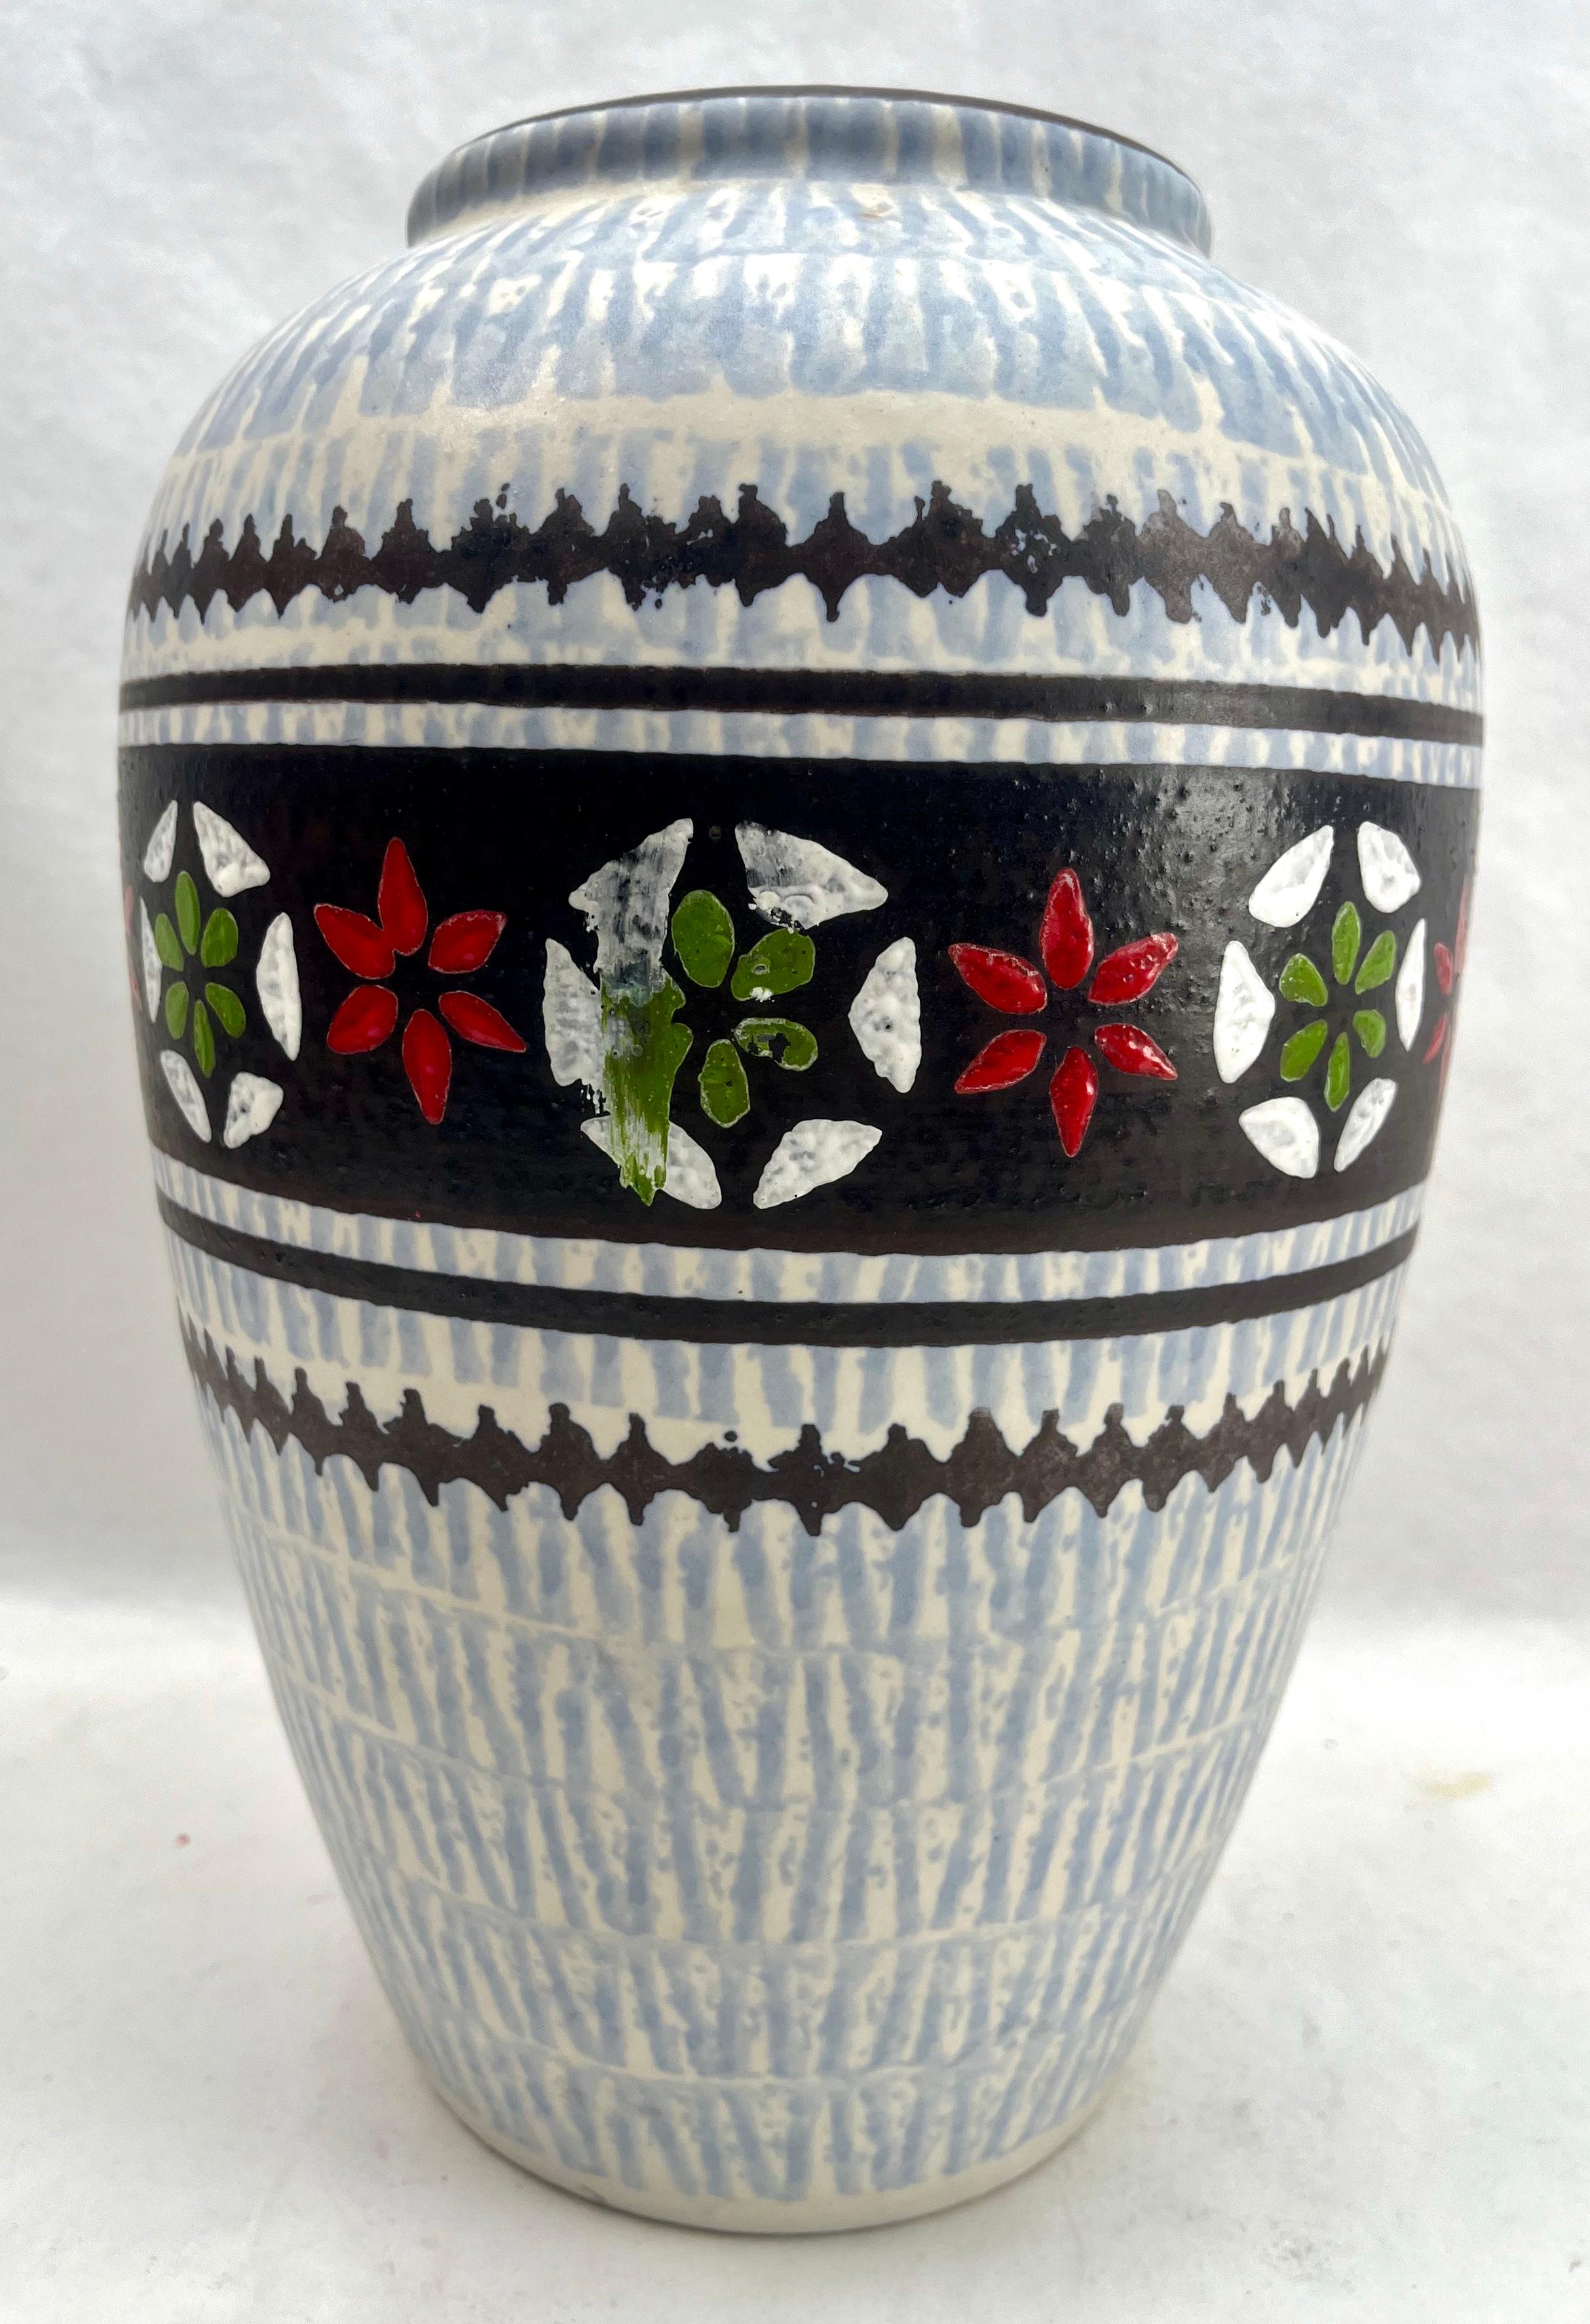 These original vintage Jasba vase was produced in the 1970s in Germany. It is made of ceramic pottery.
The bottom are marked the vase series number 136-26 Handarbeit.
Straight forward and minimalistic design of the 1960s design era. 
Super rare in